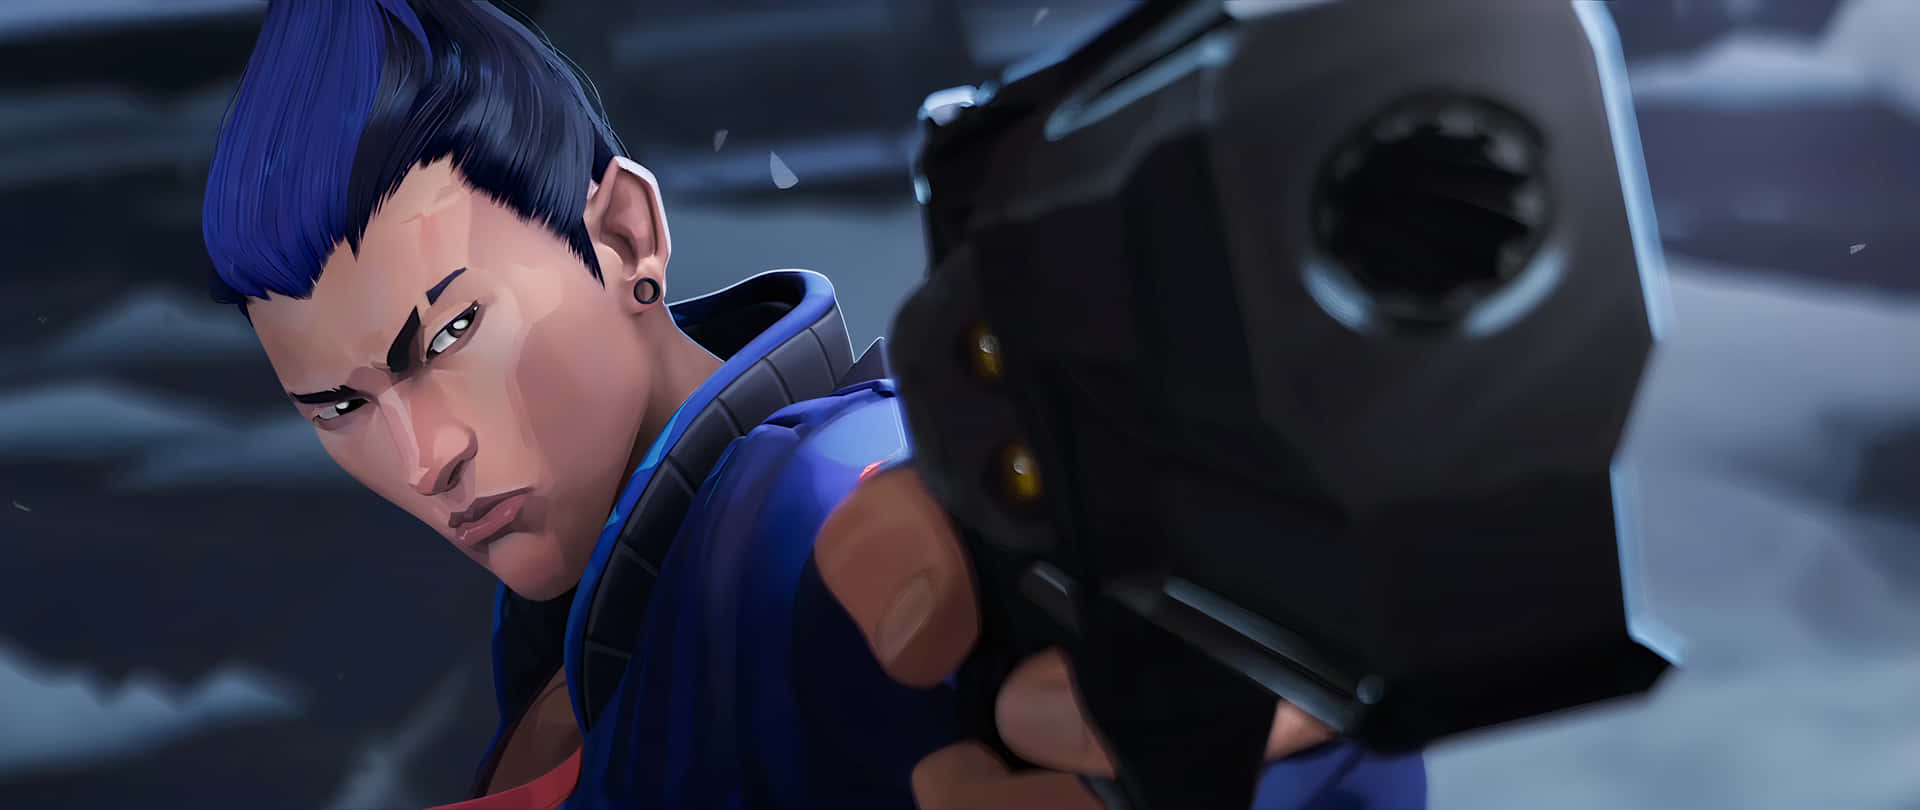 Overwatch - A Character With Blue Hair Holding A Gun Wallpaper